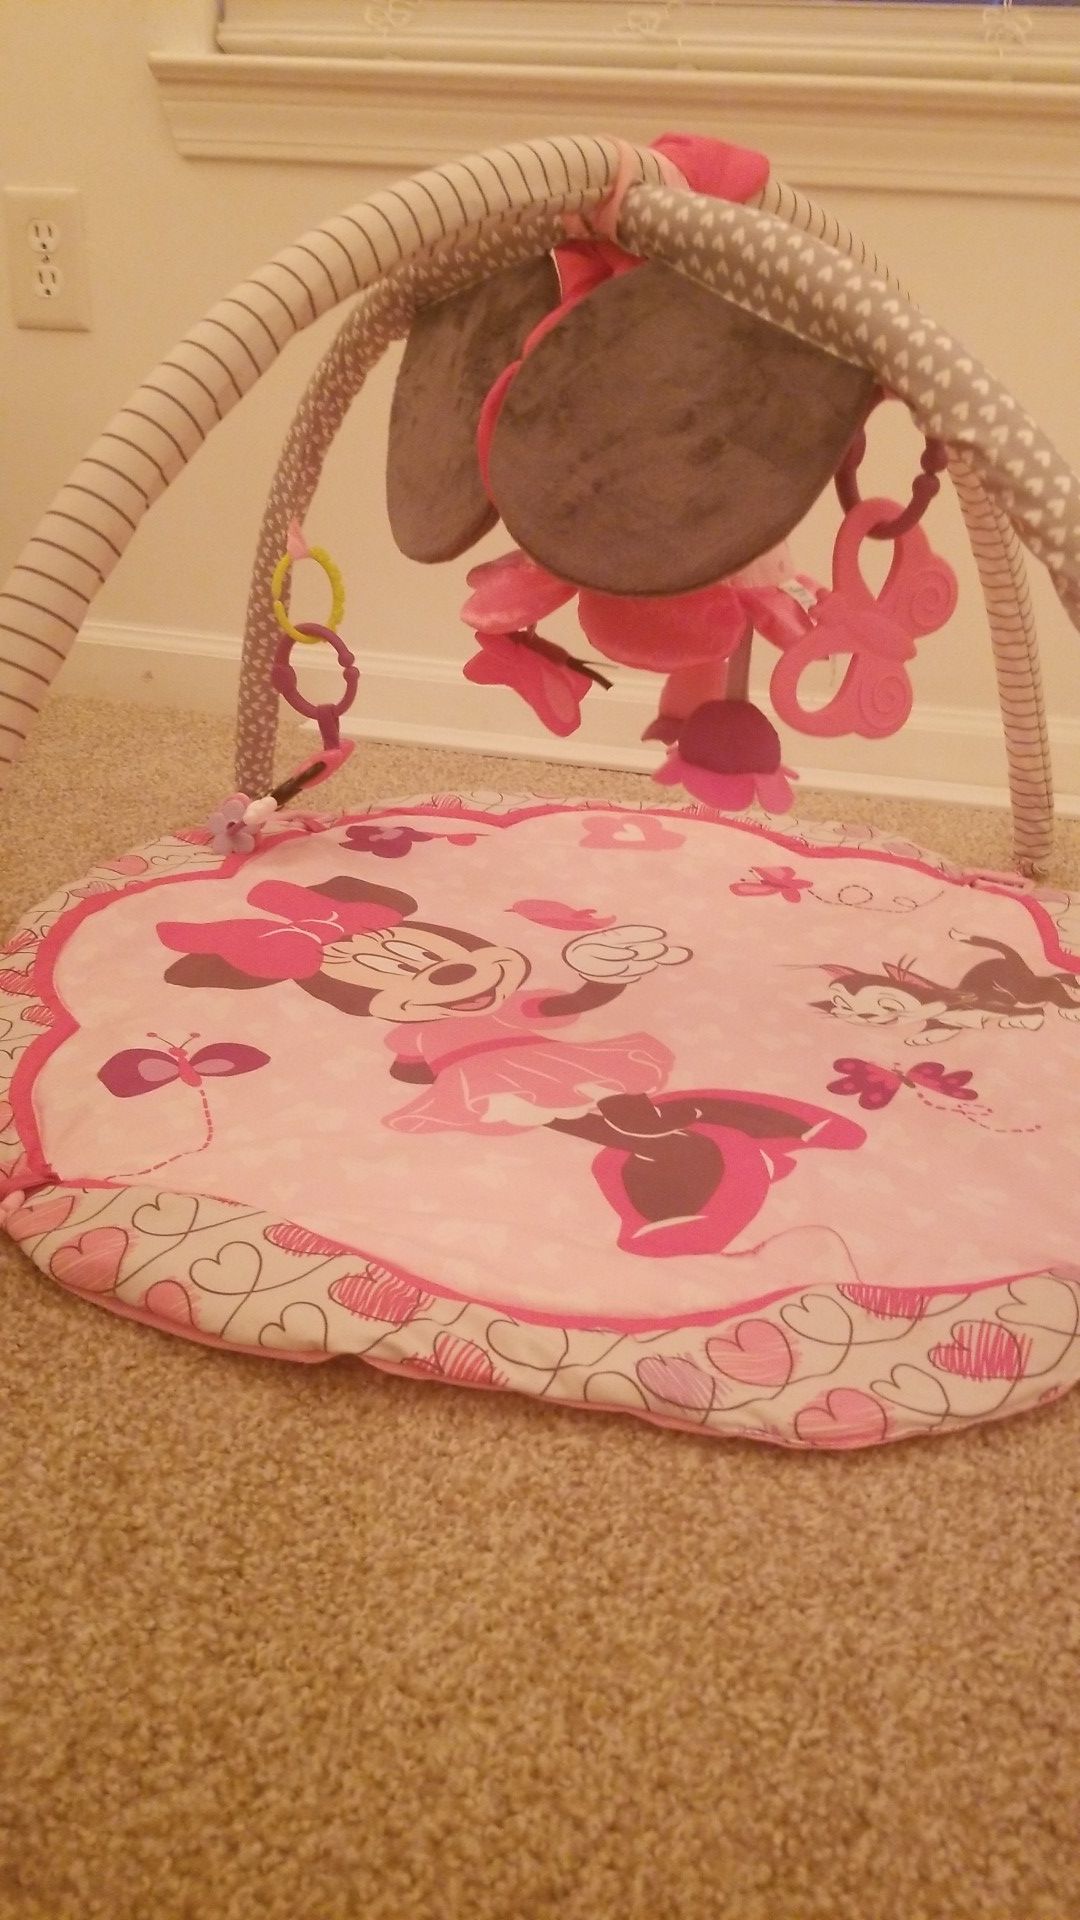 Play Mat lightly used has mirror for baby. Comes with batteries. From a Pet free smoke free home.